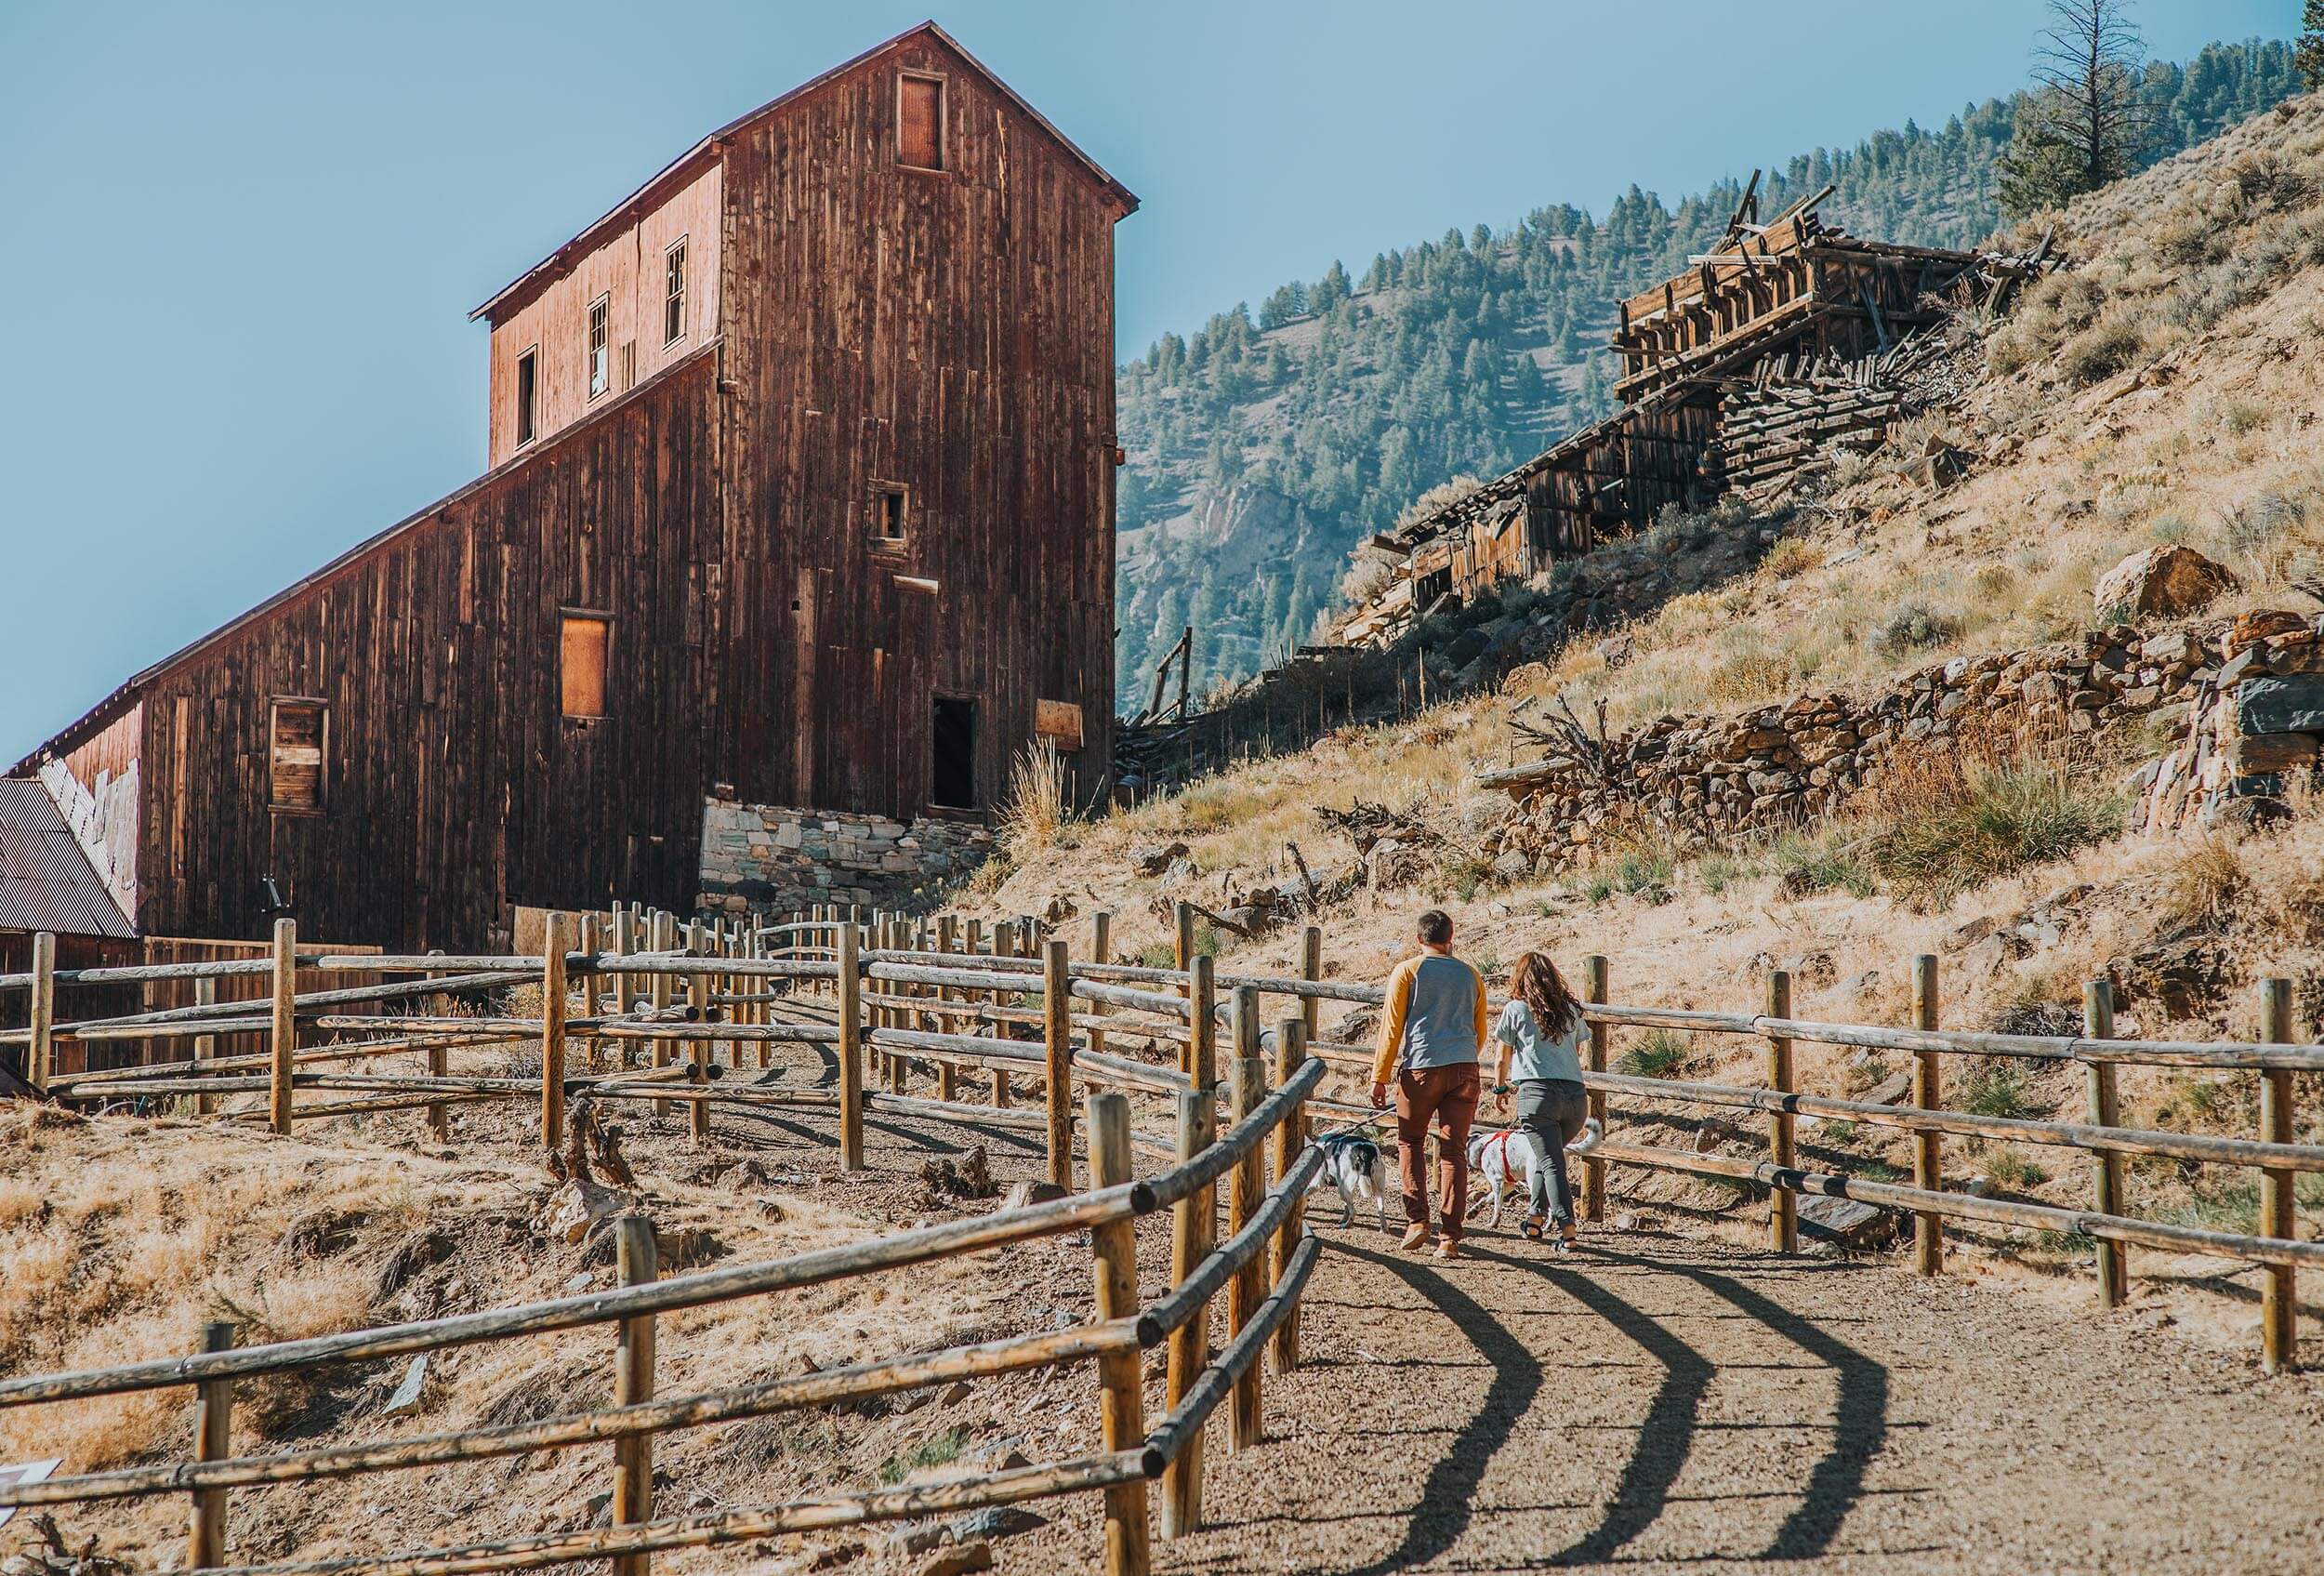 A couple walking with their two dogs along a dirt road towards a tall historic wooden building.